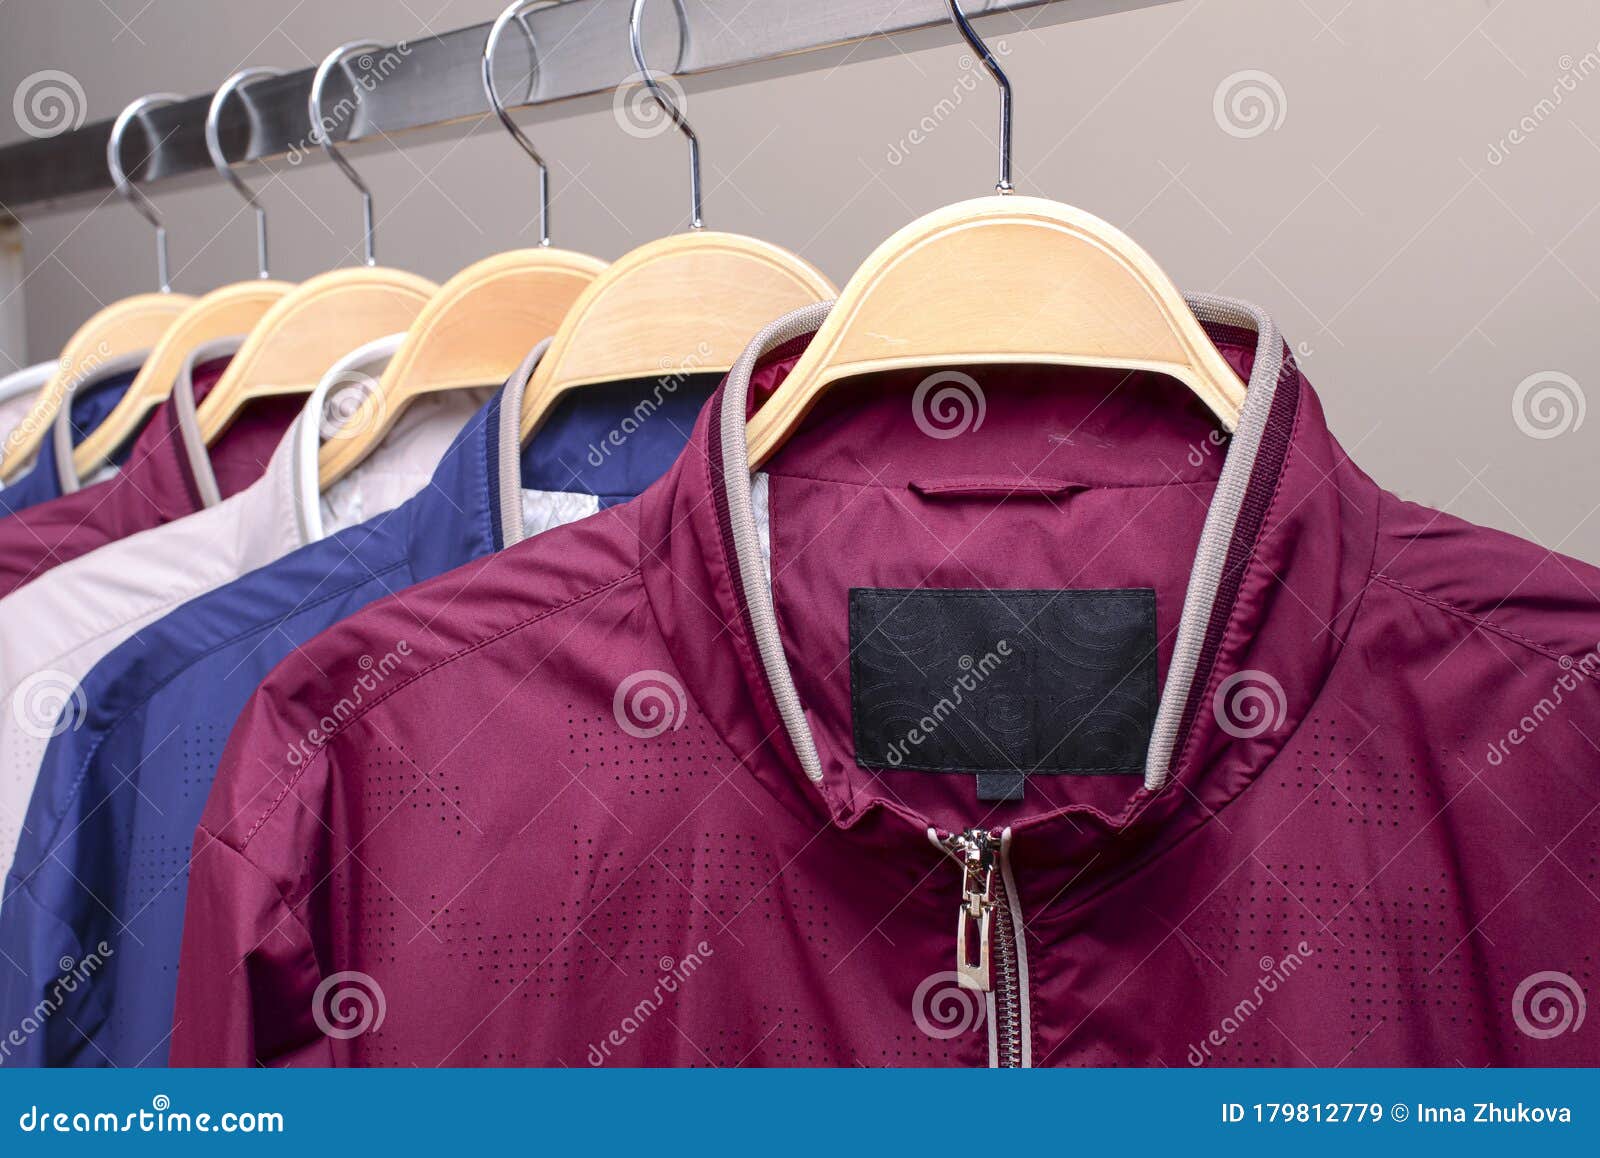 Row of Many Different Colorful Hoodie Jackets, Sport Jackets for Men and  Women. Seasonal Clothing in Store on Sale. Stock Image - Image of closet,  boutique: 179812779